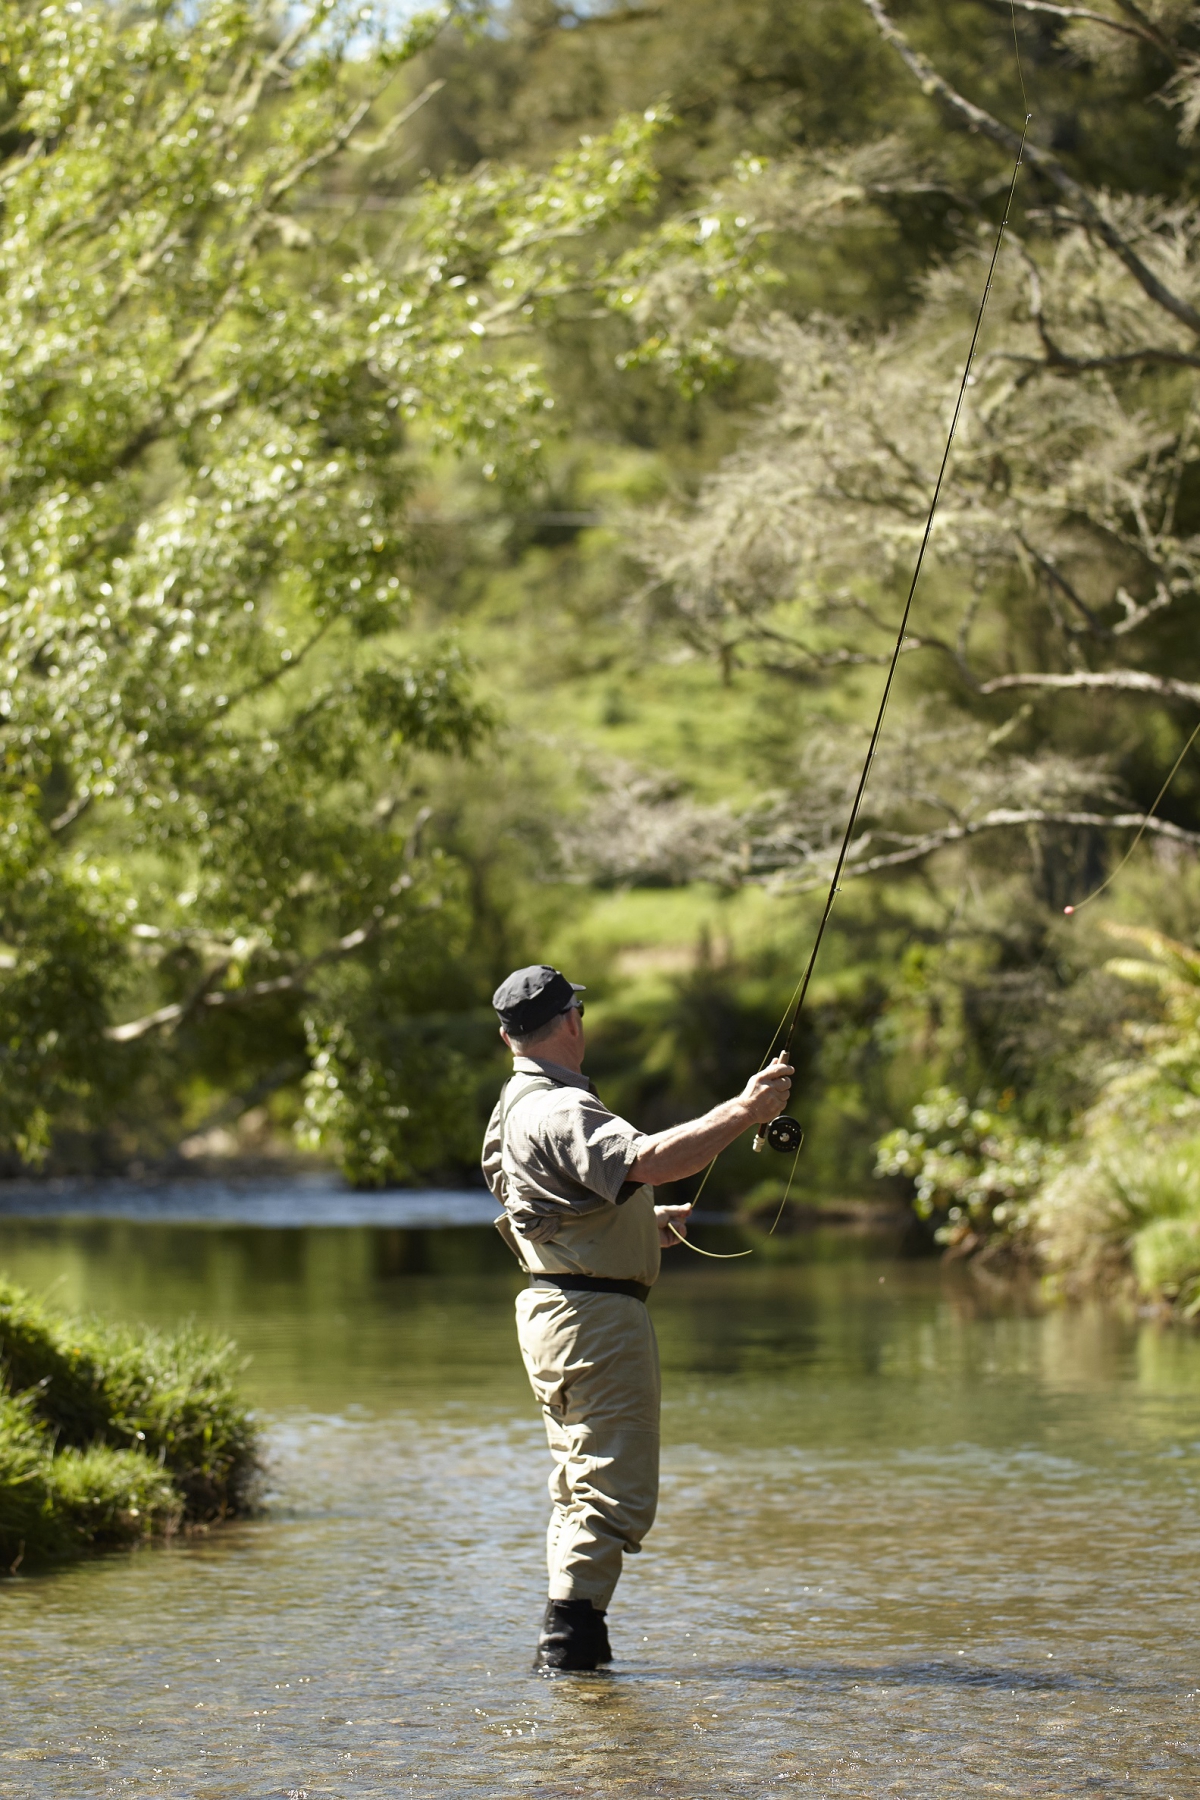 Photo of property: The rainbow and brown trout are plentiful in our river and you can catch them from the front lawn. Just bring your own rod and have a valid NZ fishing license.